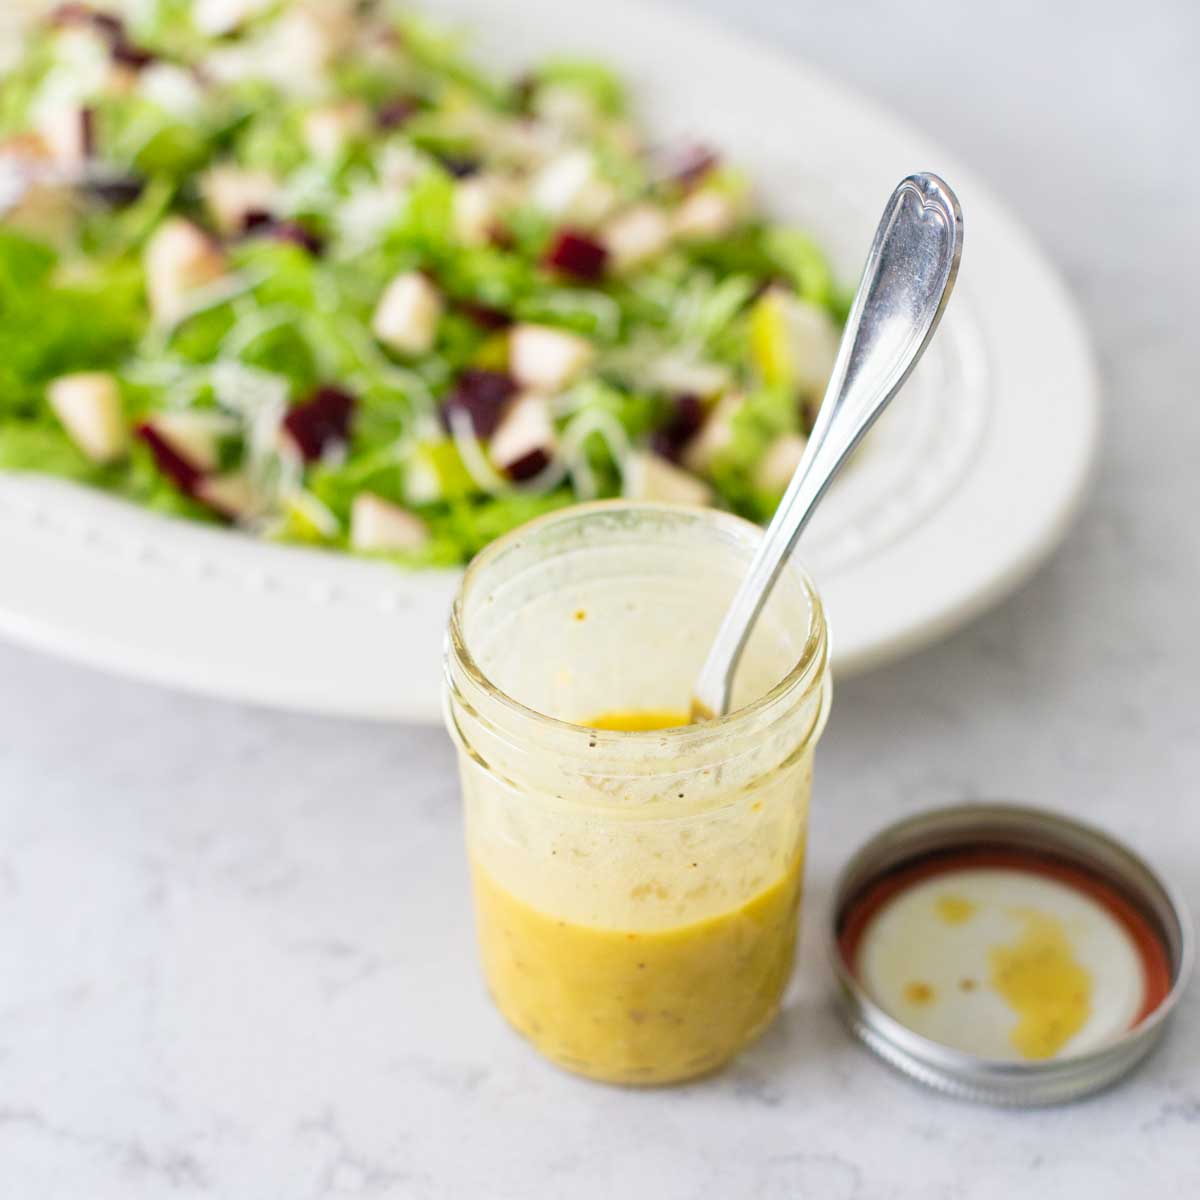 A mason jar filled with mustard vinaigrette is in front of a salad.